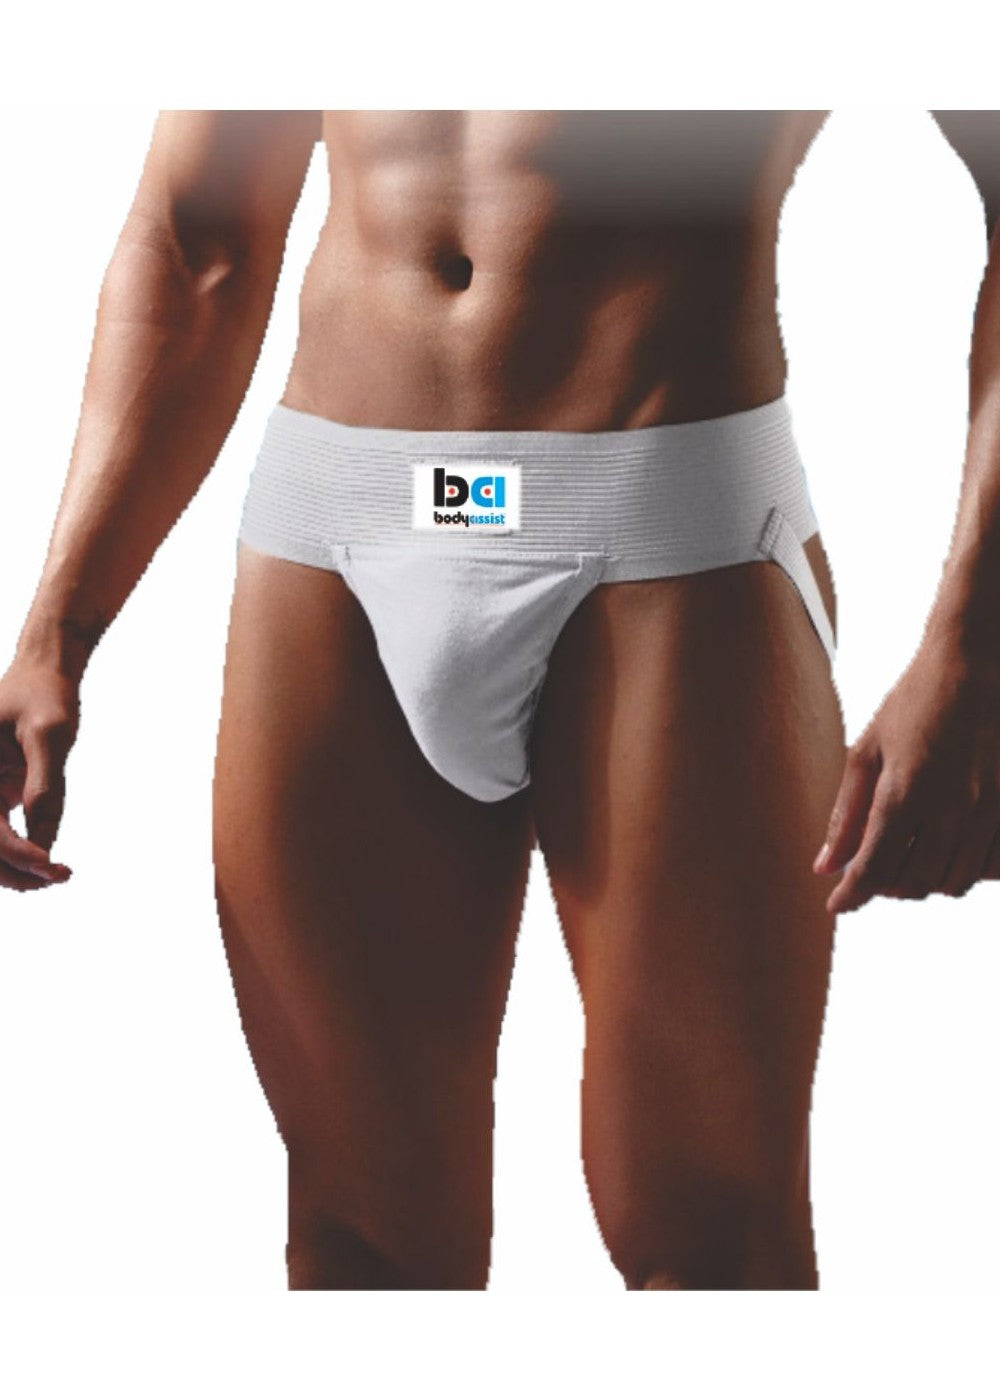 Body Assist Jockstrap White, Athletic Supporter 540 (Free Shipping) –  BodyHeal